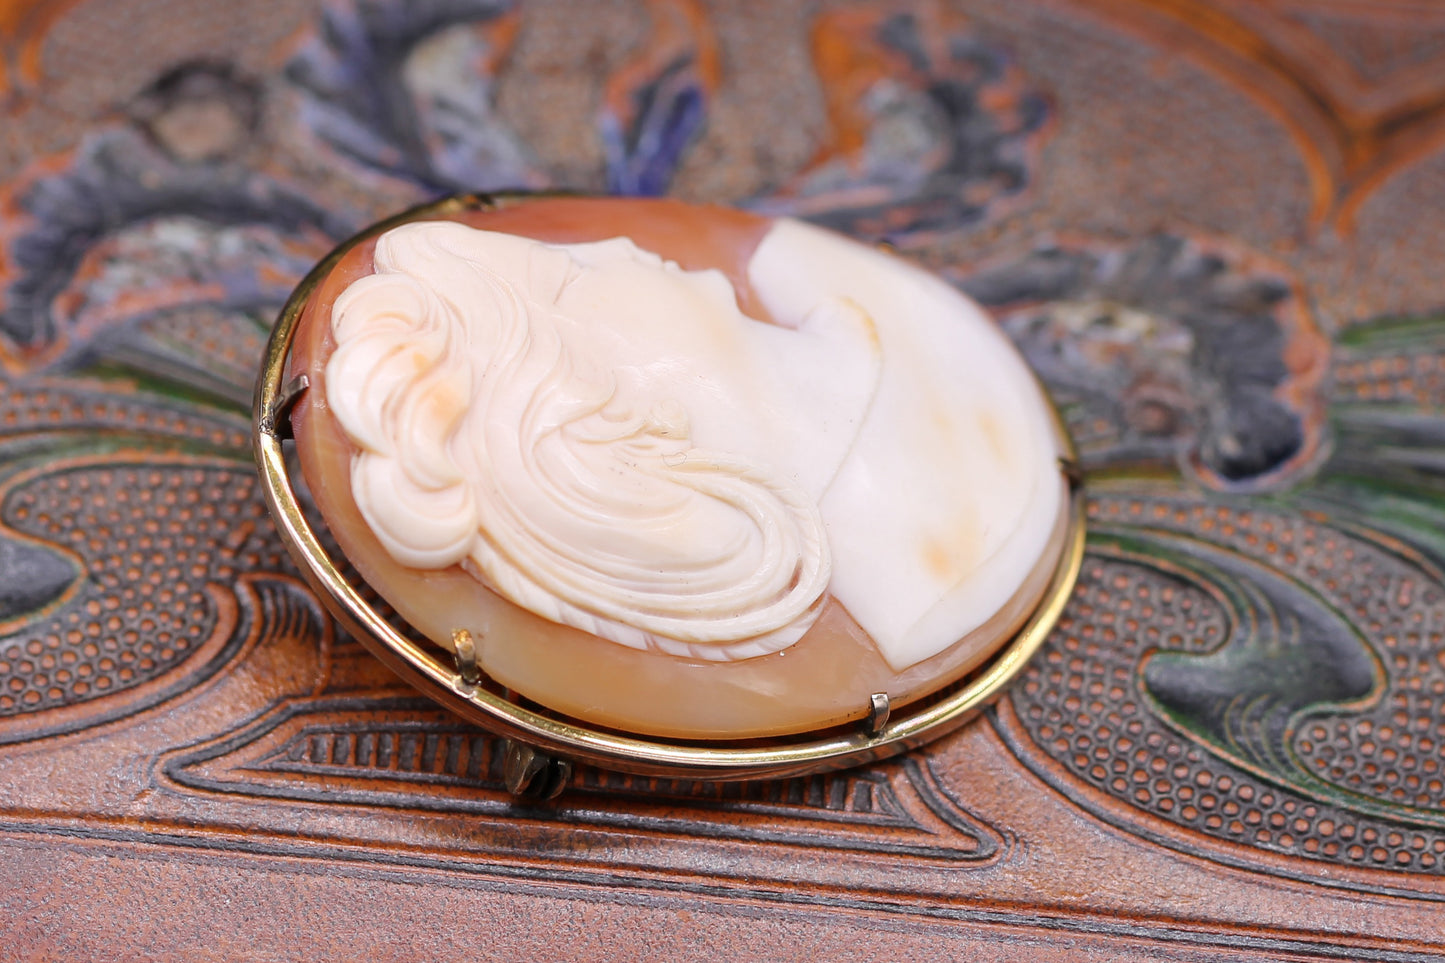 Stunning Antique 9ct Gold Shell Cameo Brooch